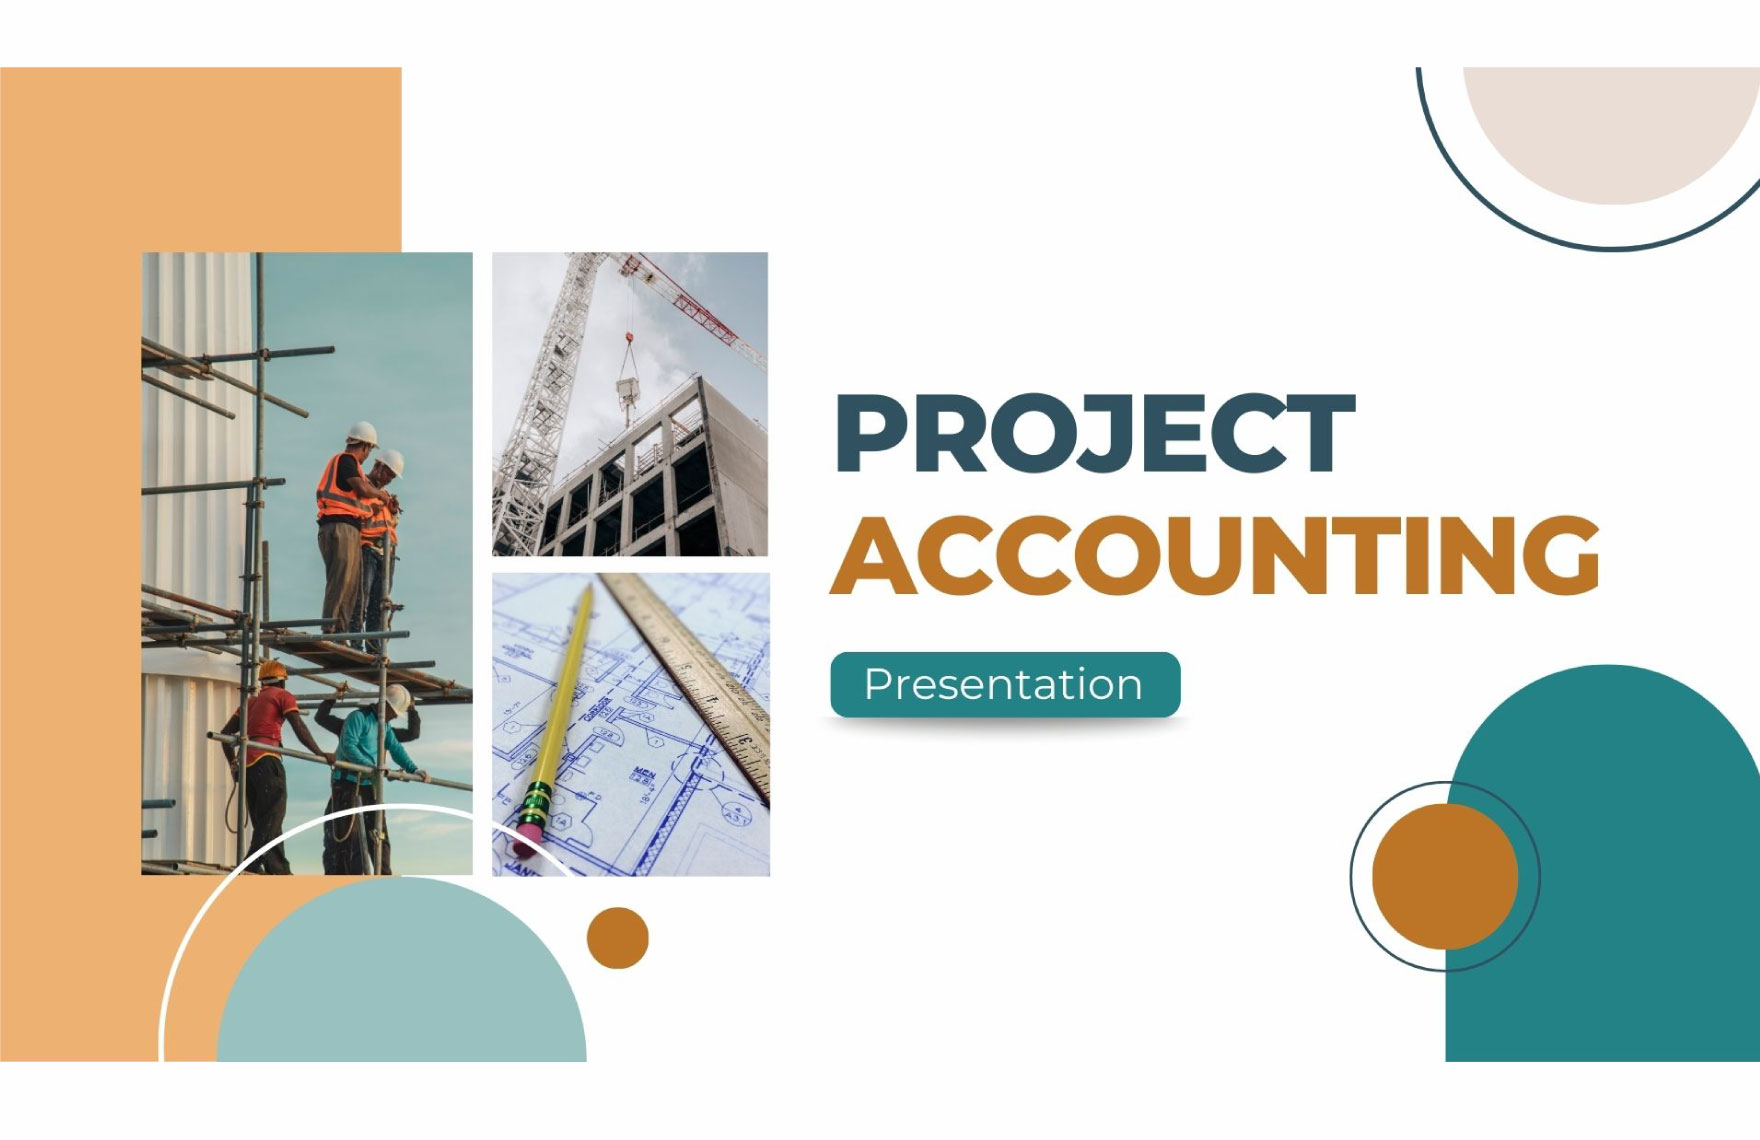 Project Accounting Template